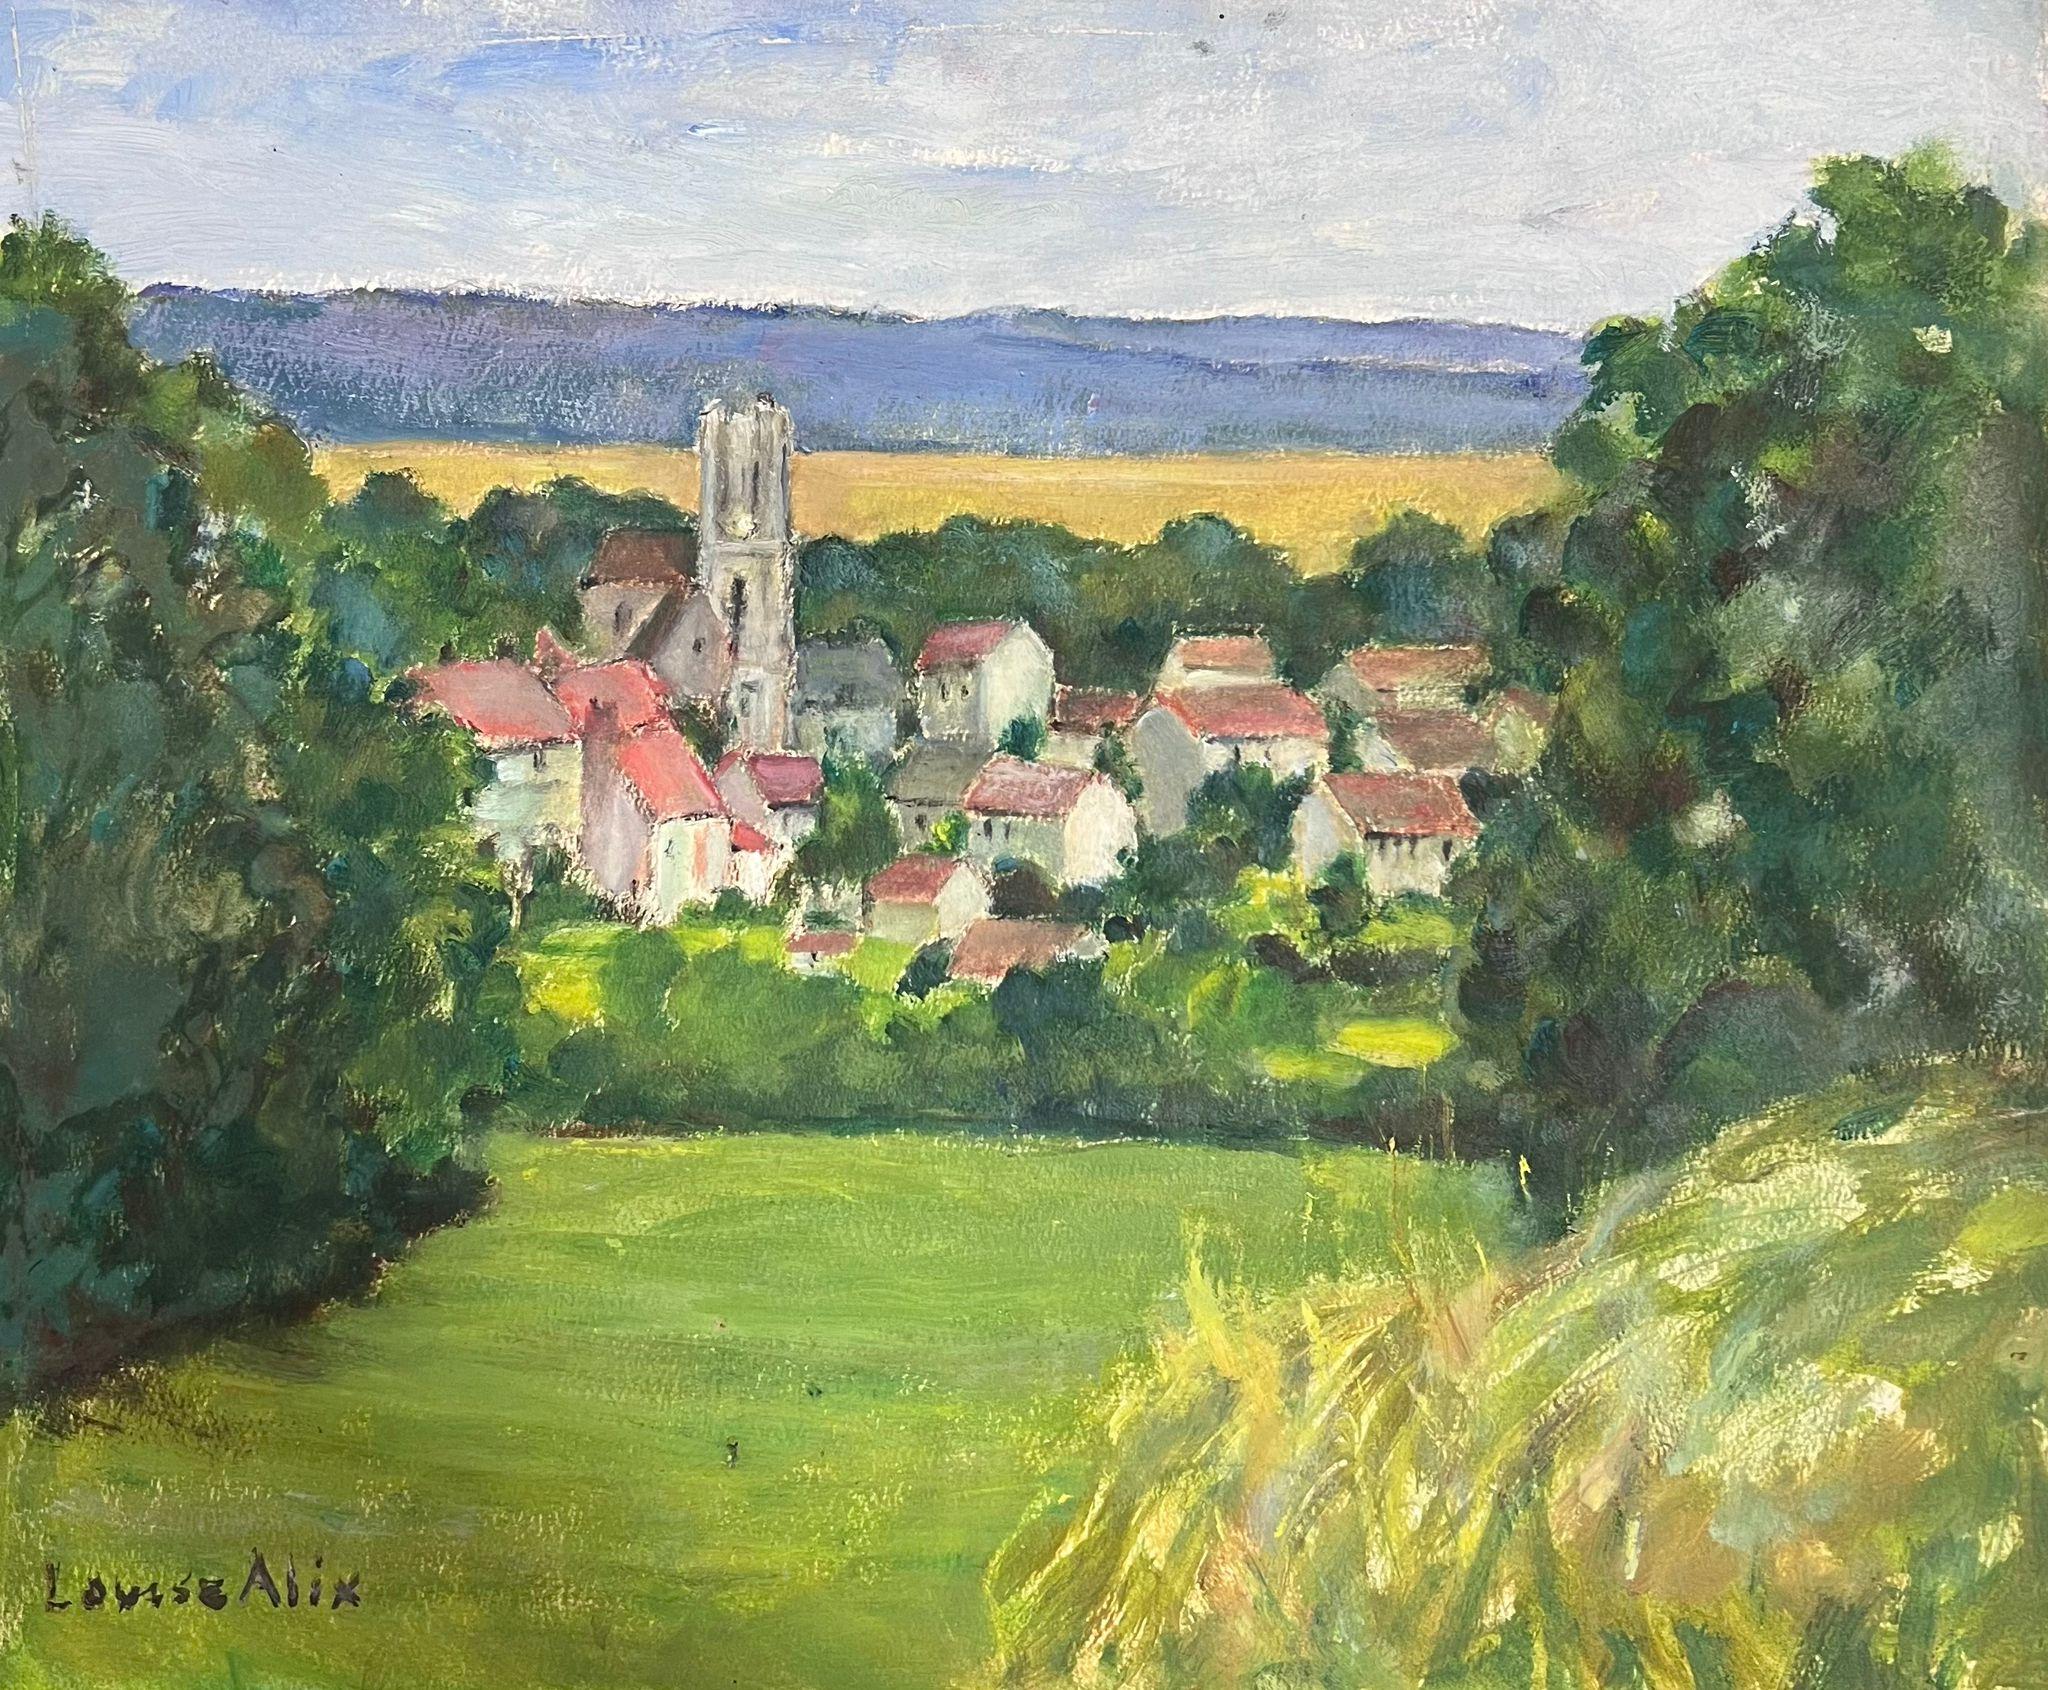 Louise Alix Landscape Painting - 1930's French Church In Red Roof Village In Open Bright Green Landscape